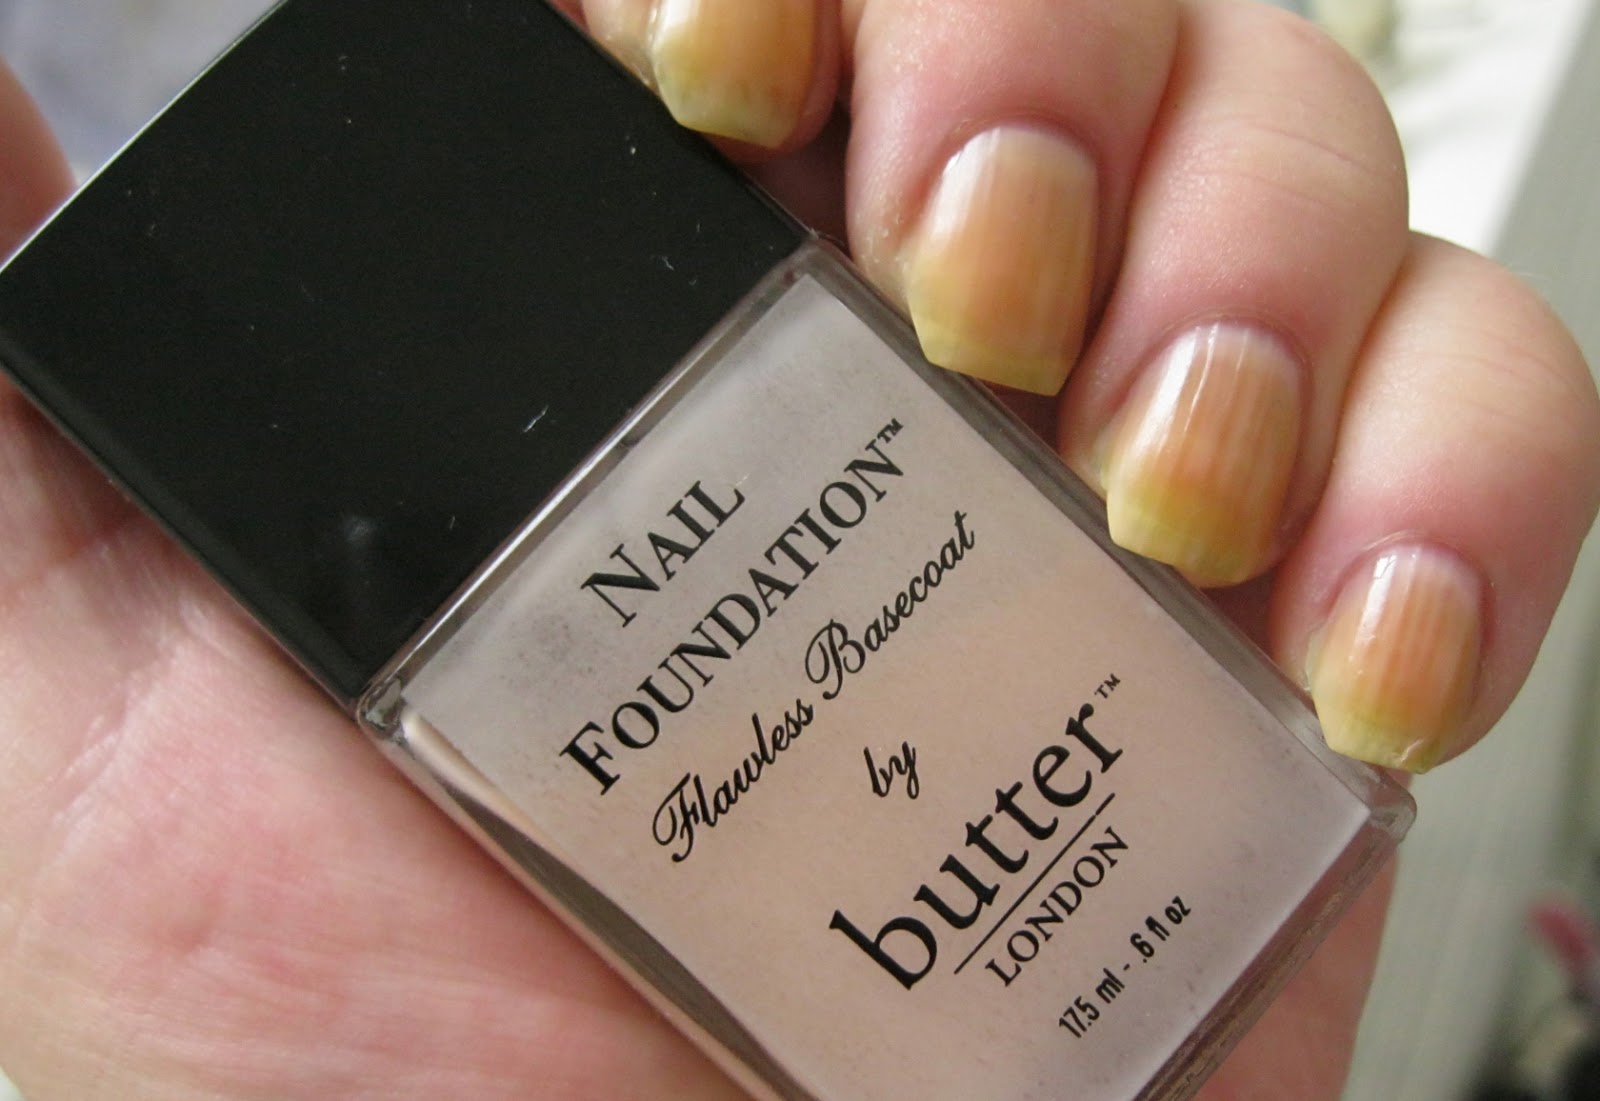 5. Butter London Nail Lacquer in "Proud" - wide 9